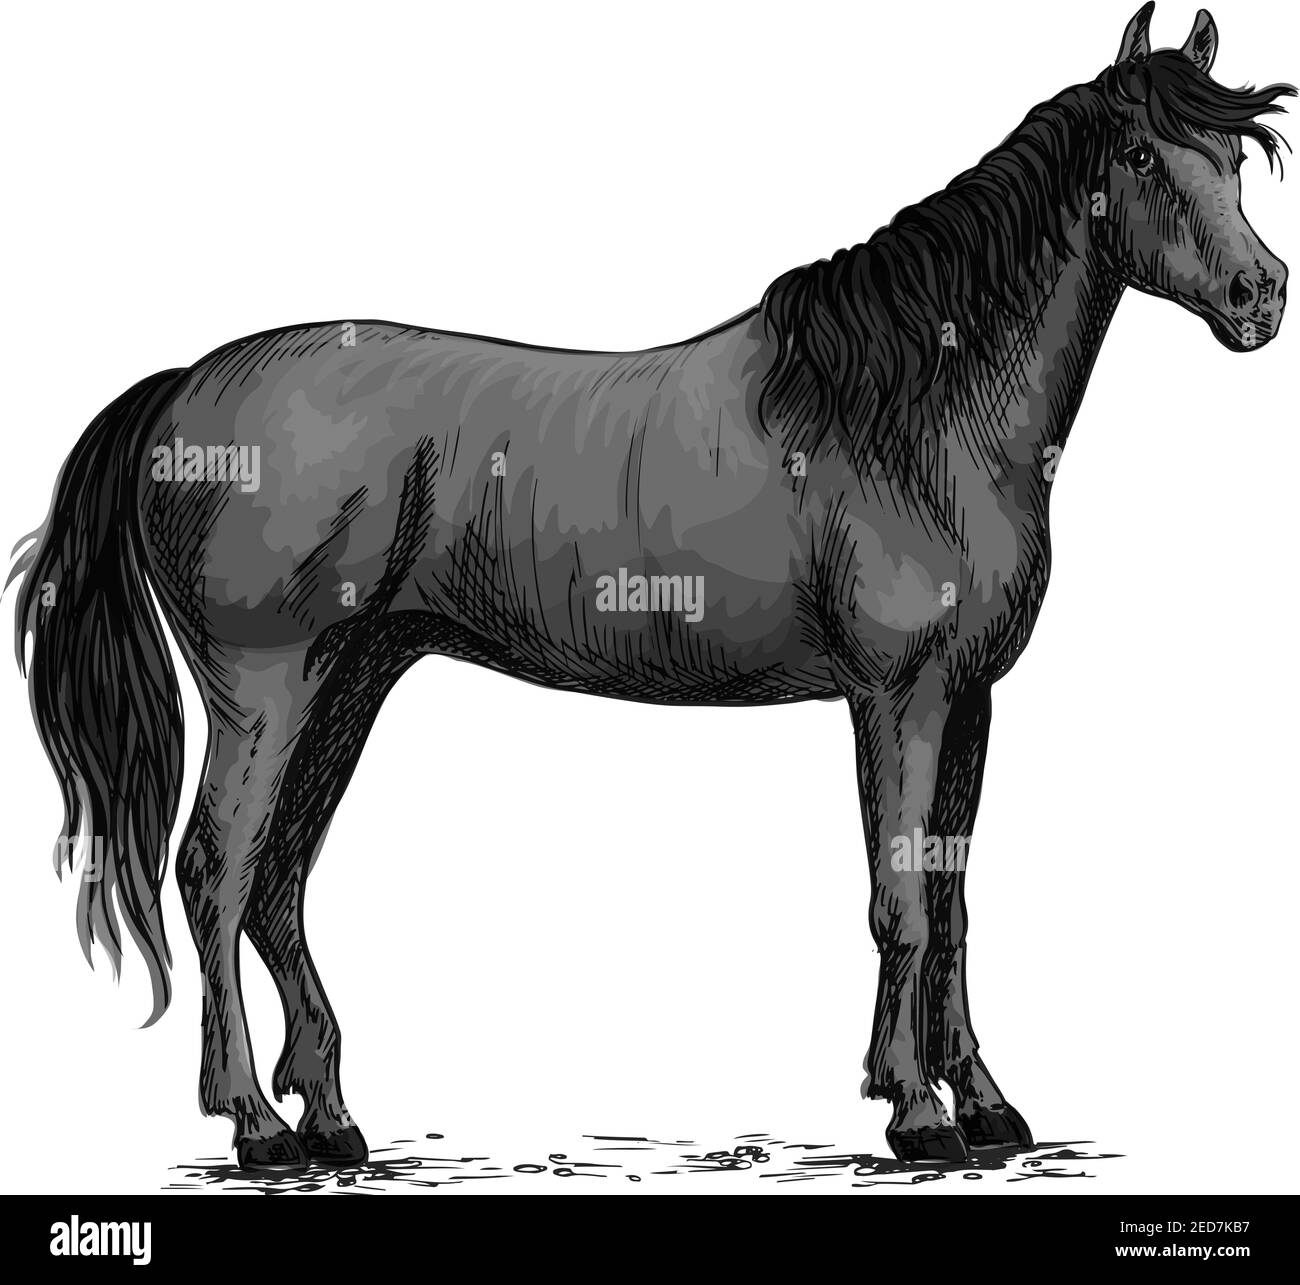 Horse vector sketch. Black wild mustang standing on ground. Farm stallion for equestrian racing sport, horse riding races club, bets or equine exhibit Stock Vector